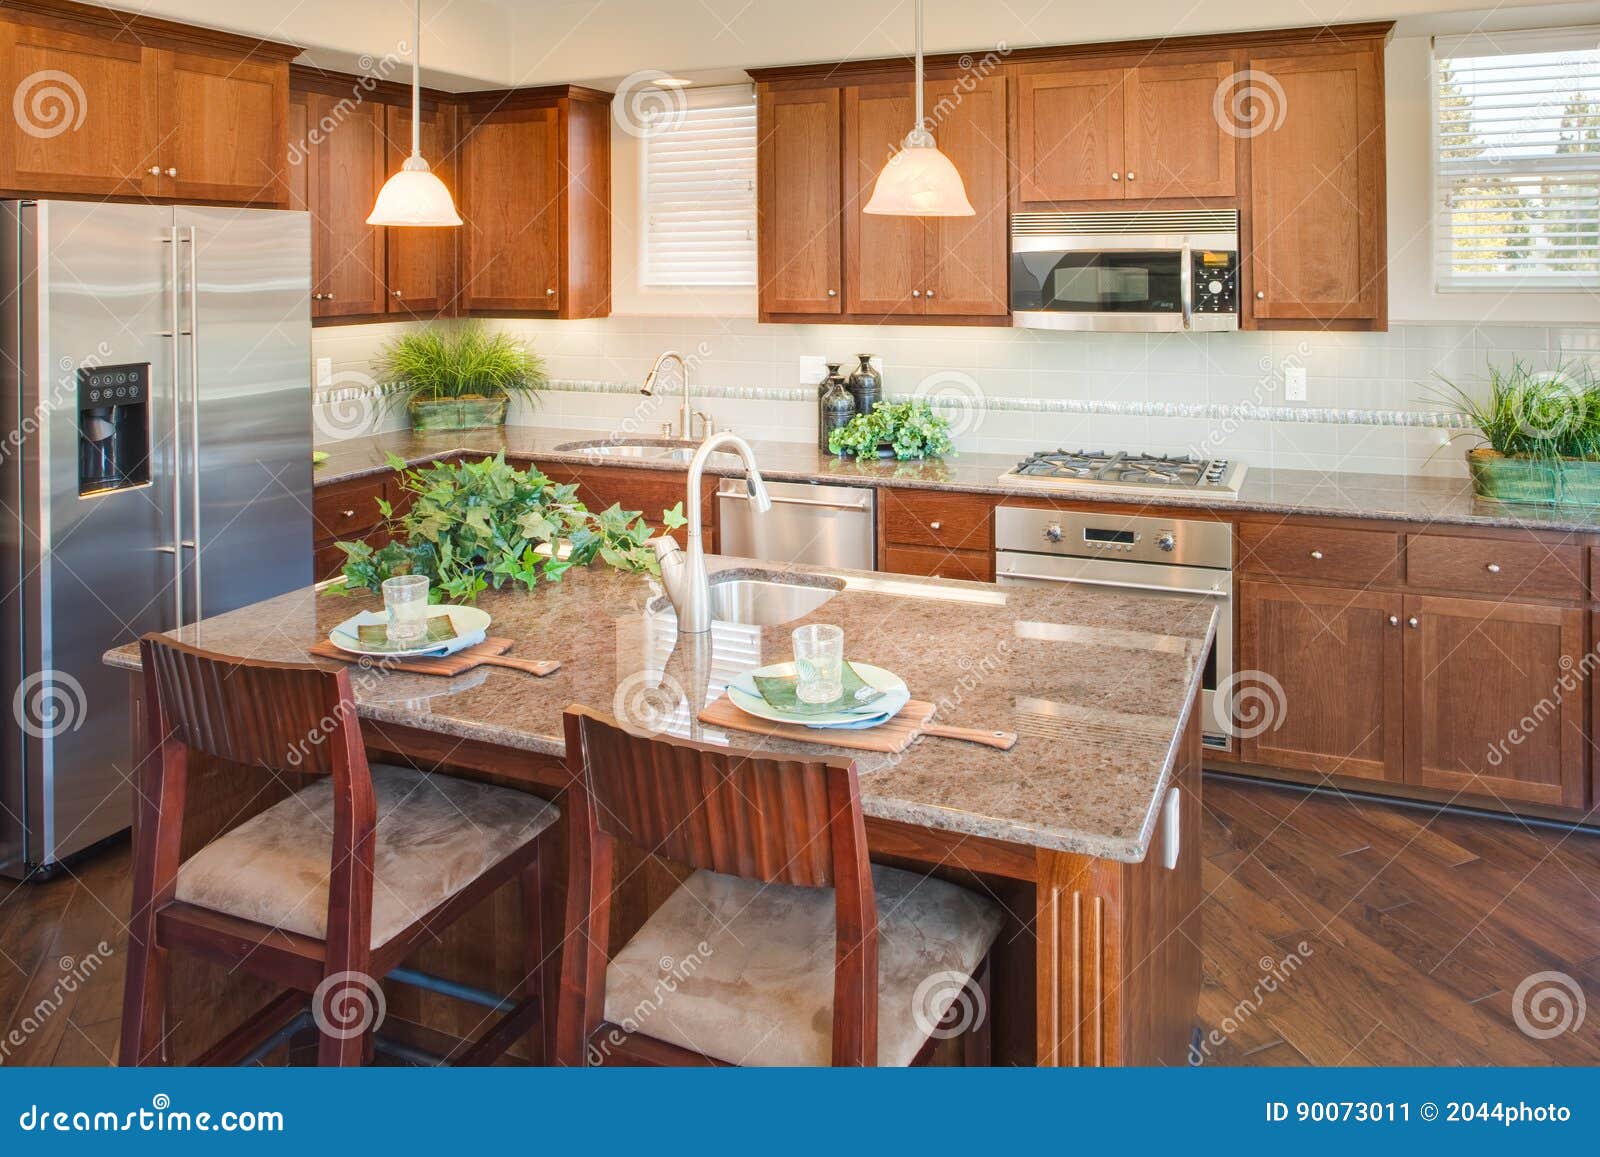 residential home kitchen